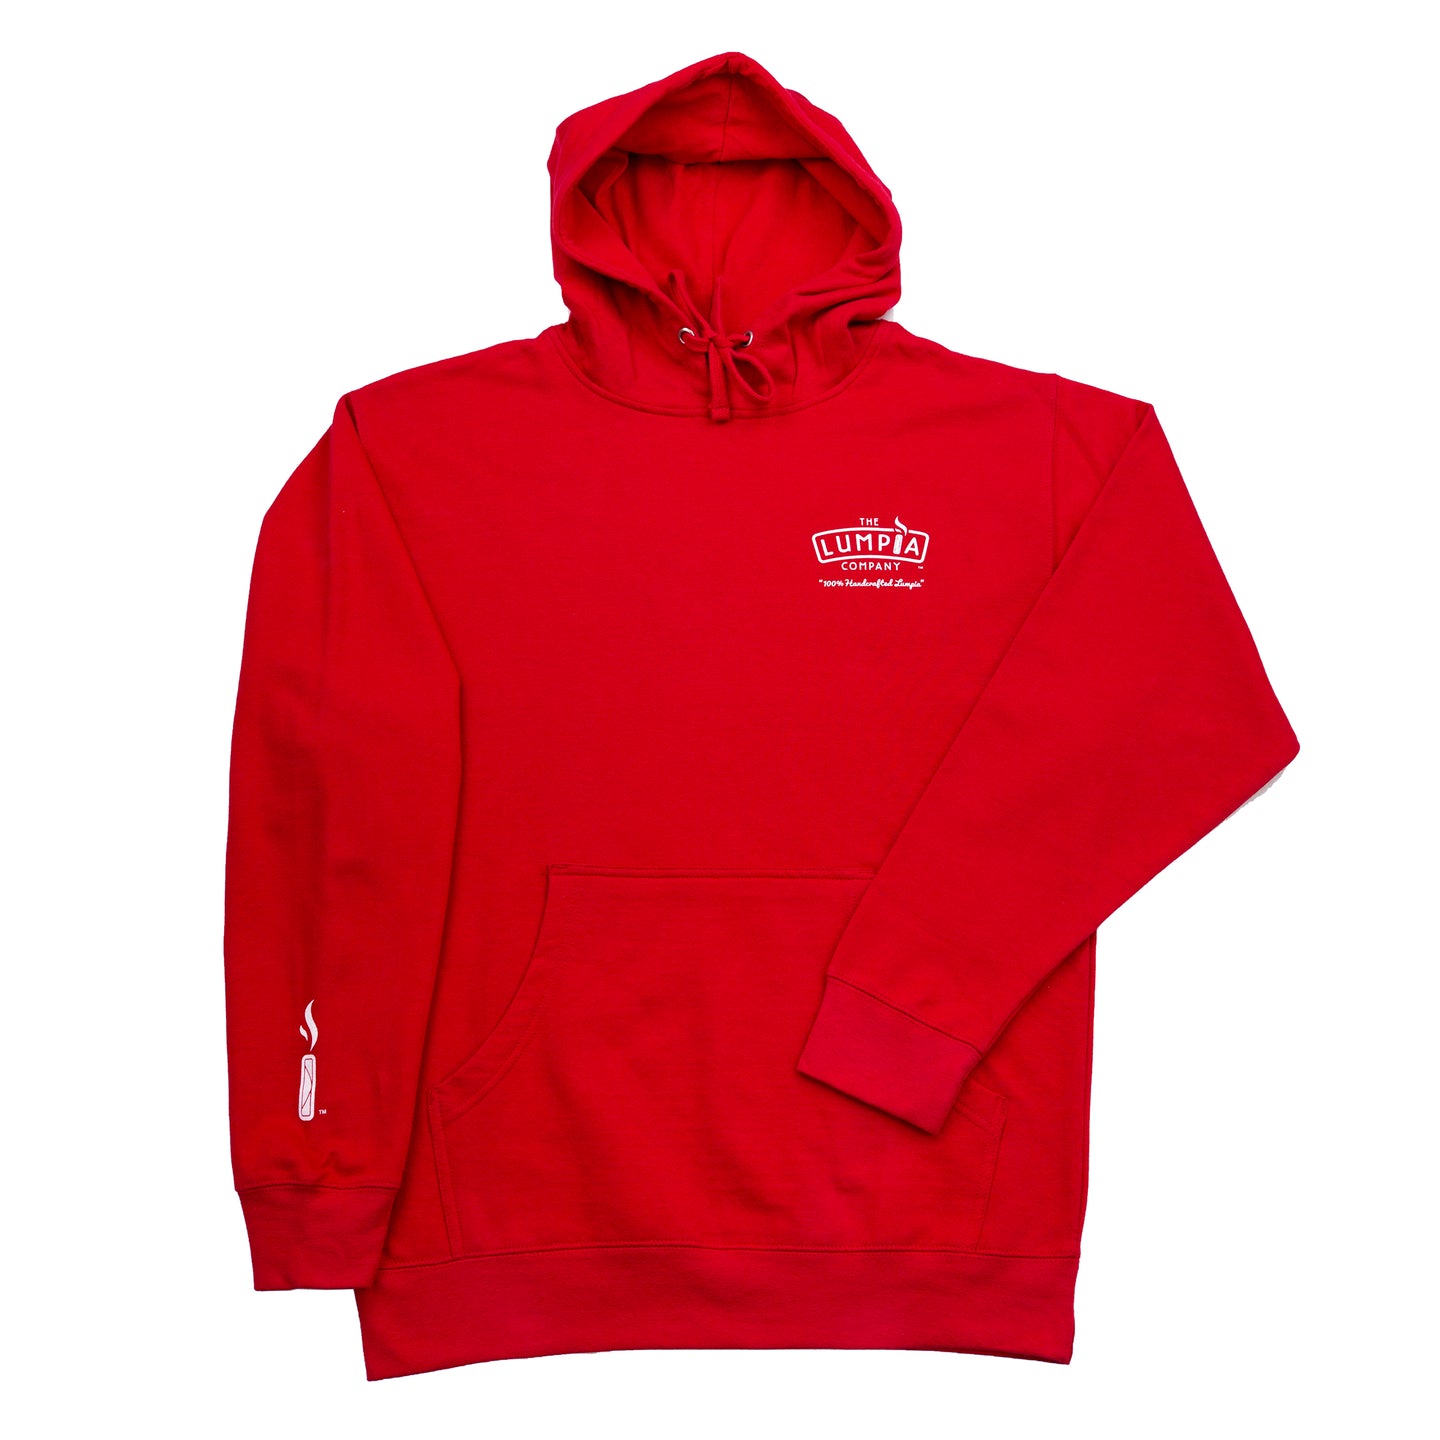 The Lumpia Company Red Pullover Hoodie